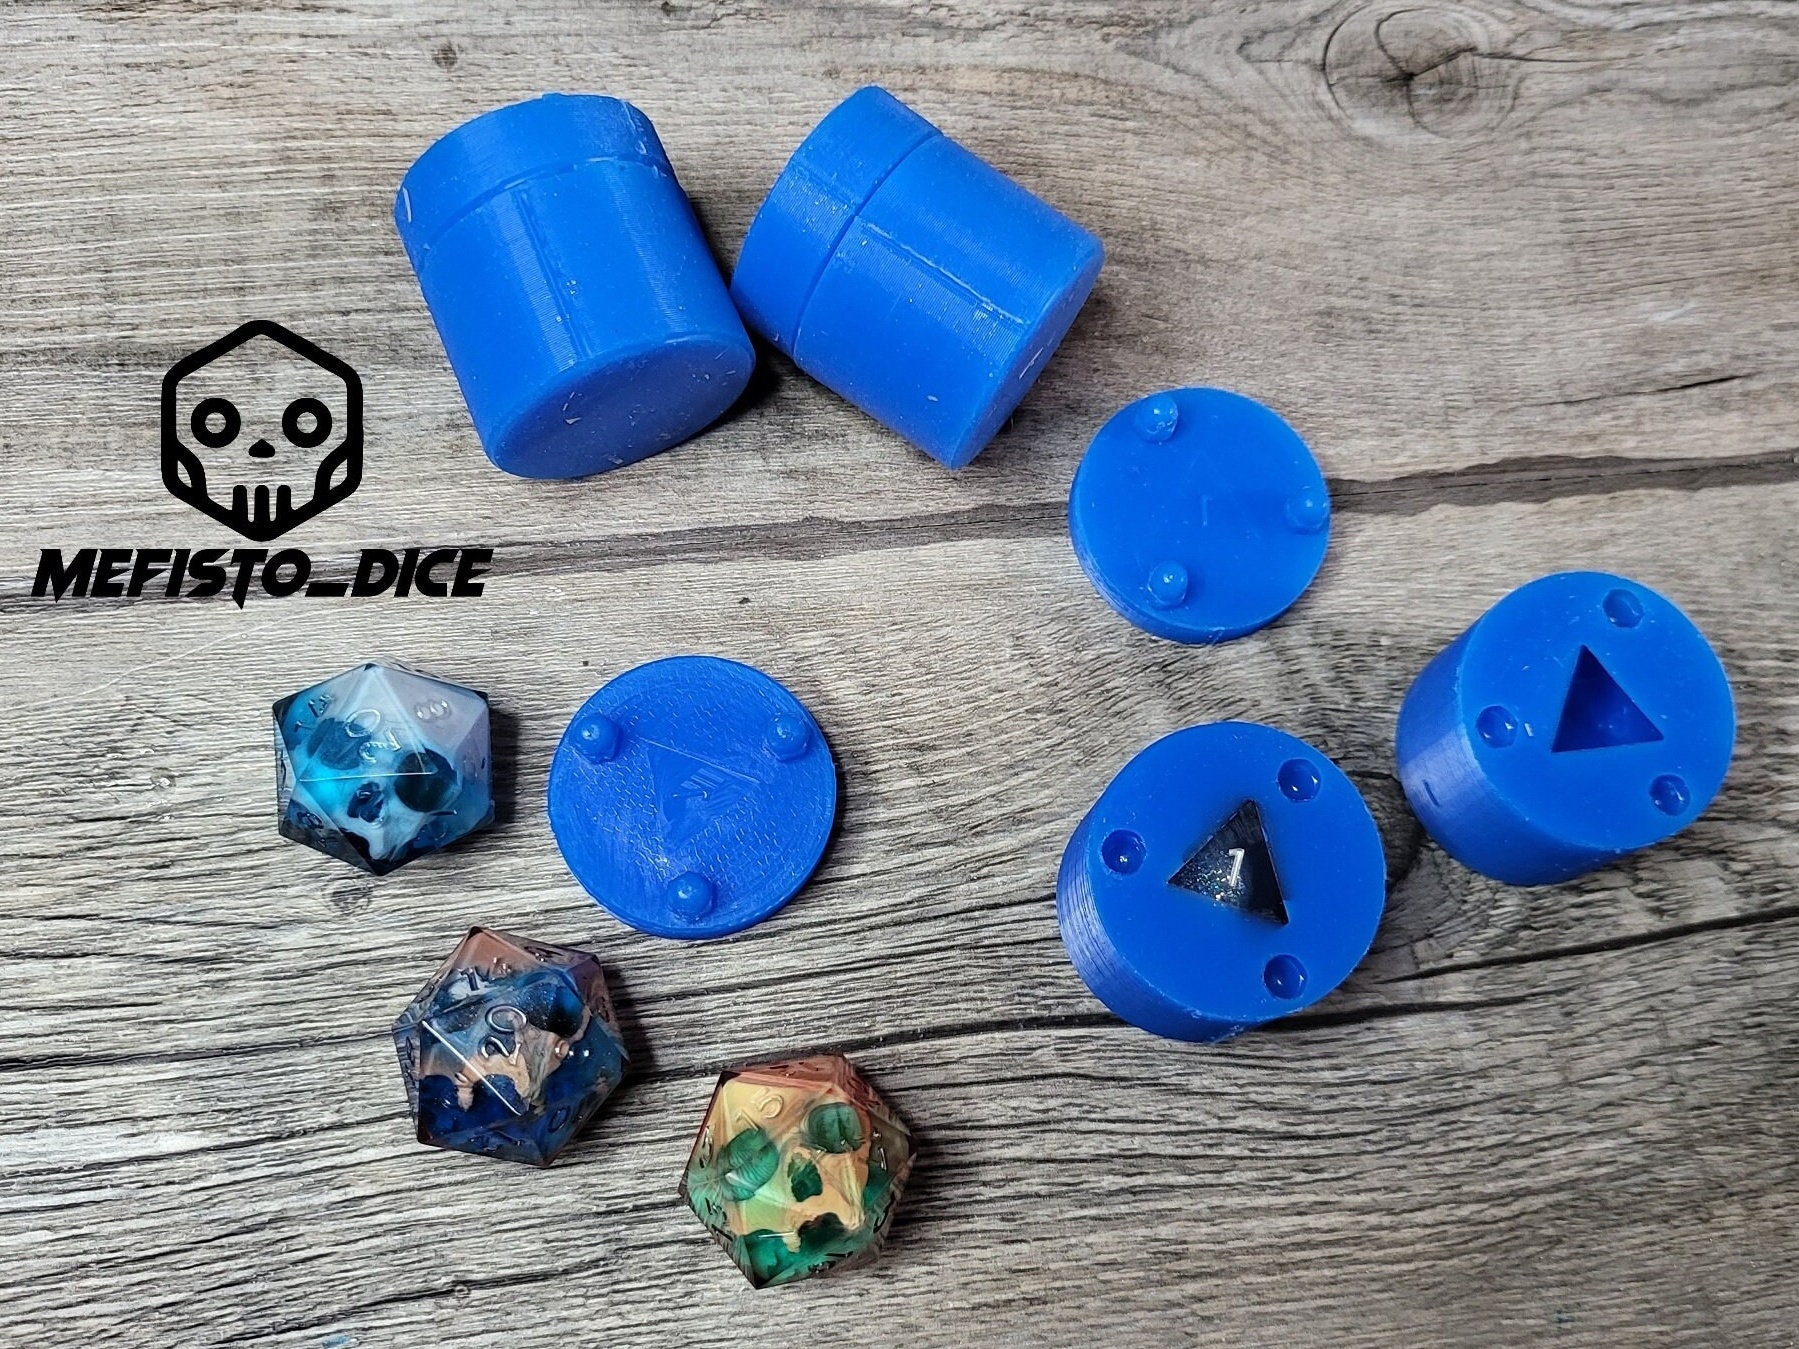 Dnd Dice Mold Set With Blanks/geode Mold Various D6 and D4 Shapes